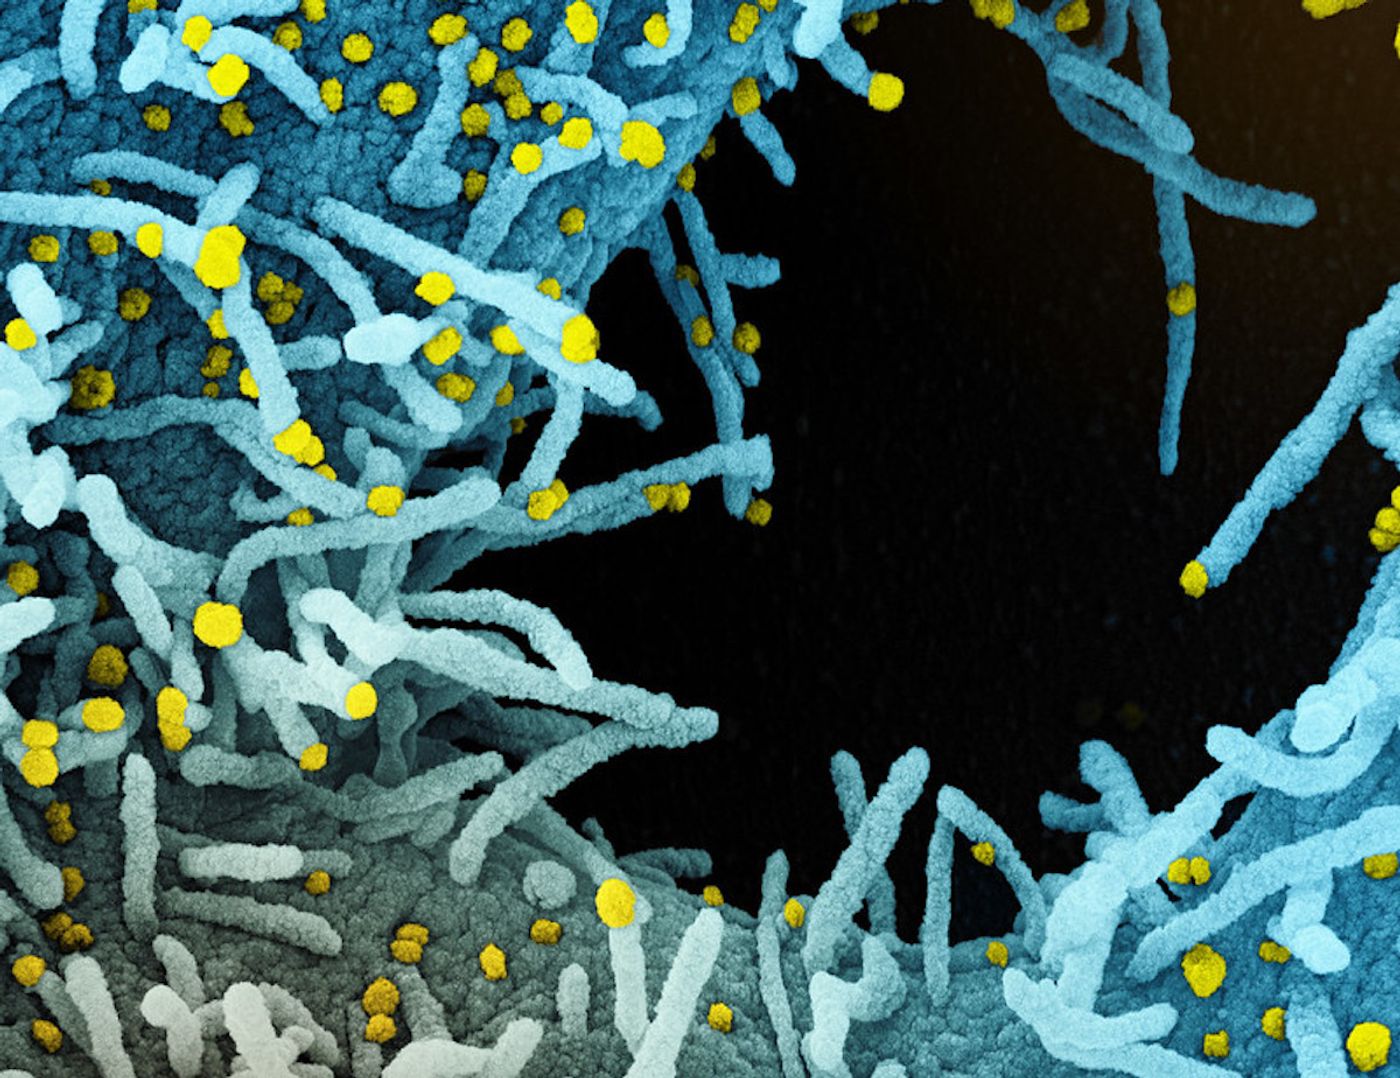 Colorized scanning electron micrograph of a cell heavily infected with SARS-CoV-2 virus particles (yellow), isolated from a patient sample. The black area in the image is extracellular space between the cells. Image captured at the NIAID Integrated Research Facility (IRF) in Fort Detrick, Maryland. Credit: (Modified from) NIAID